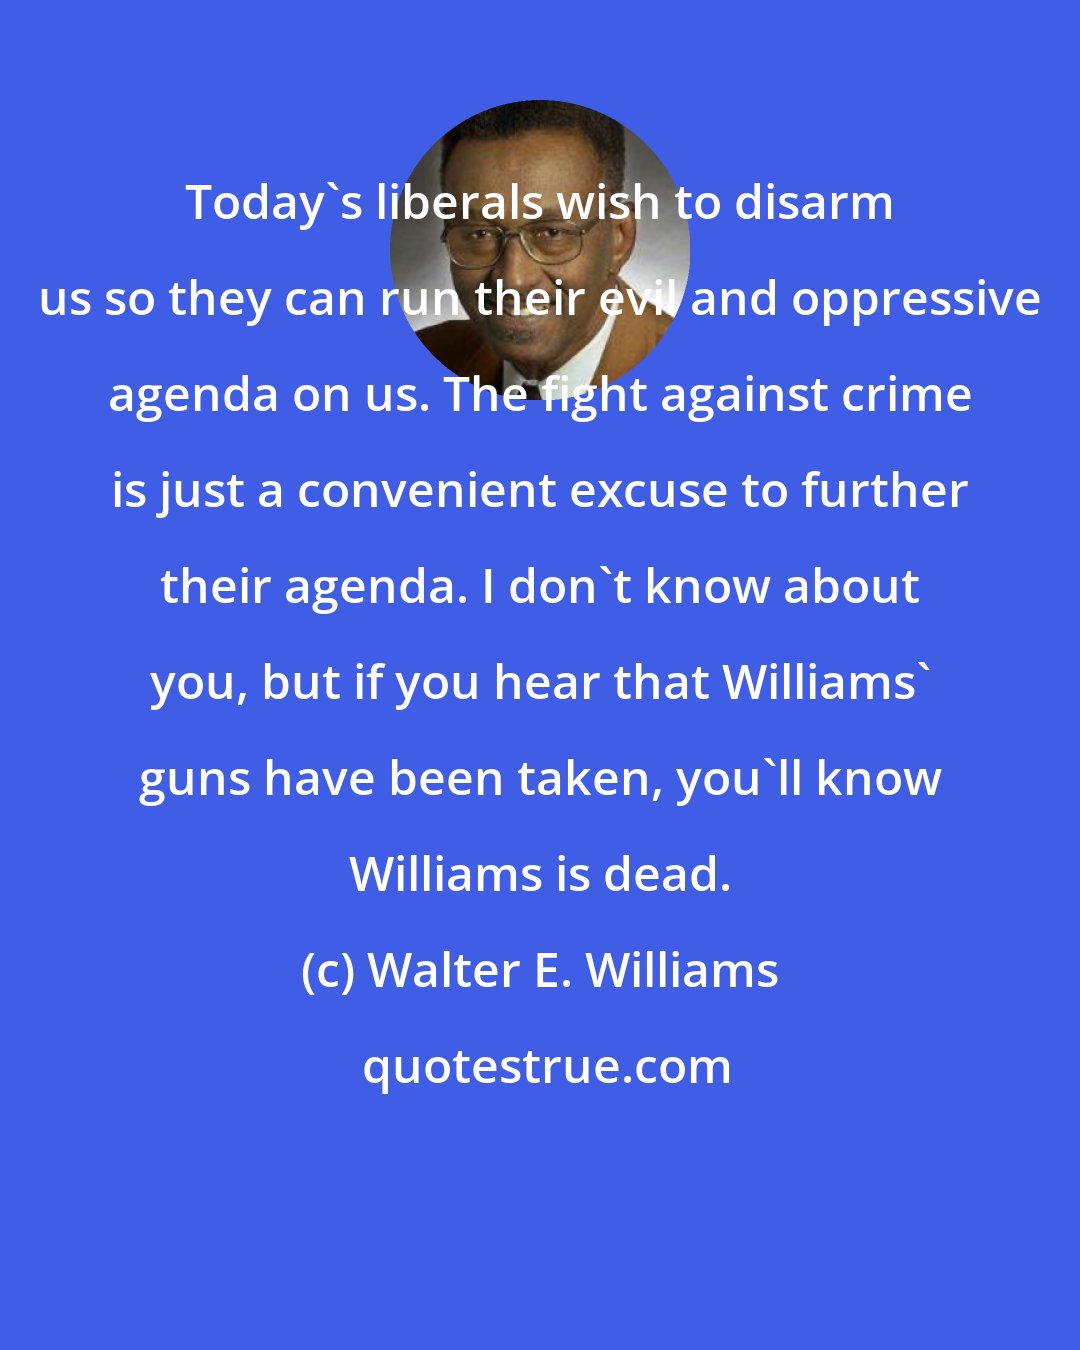 Walter E. Williams: Today's liberals wish to disarm us so they can run their evil and oppressive agenda on us. The fight against crime is just a convenient excuse to further their agenda. I don't know about you, but if you hear that Williams' guns have been taken, you'll know Williams is dead.